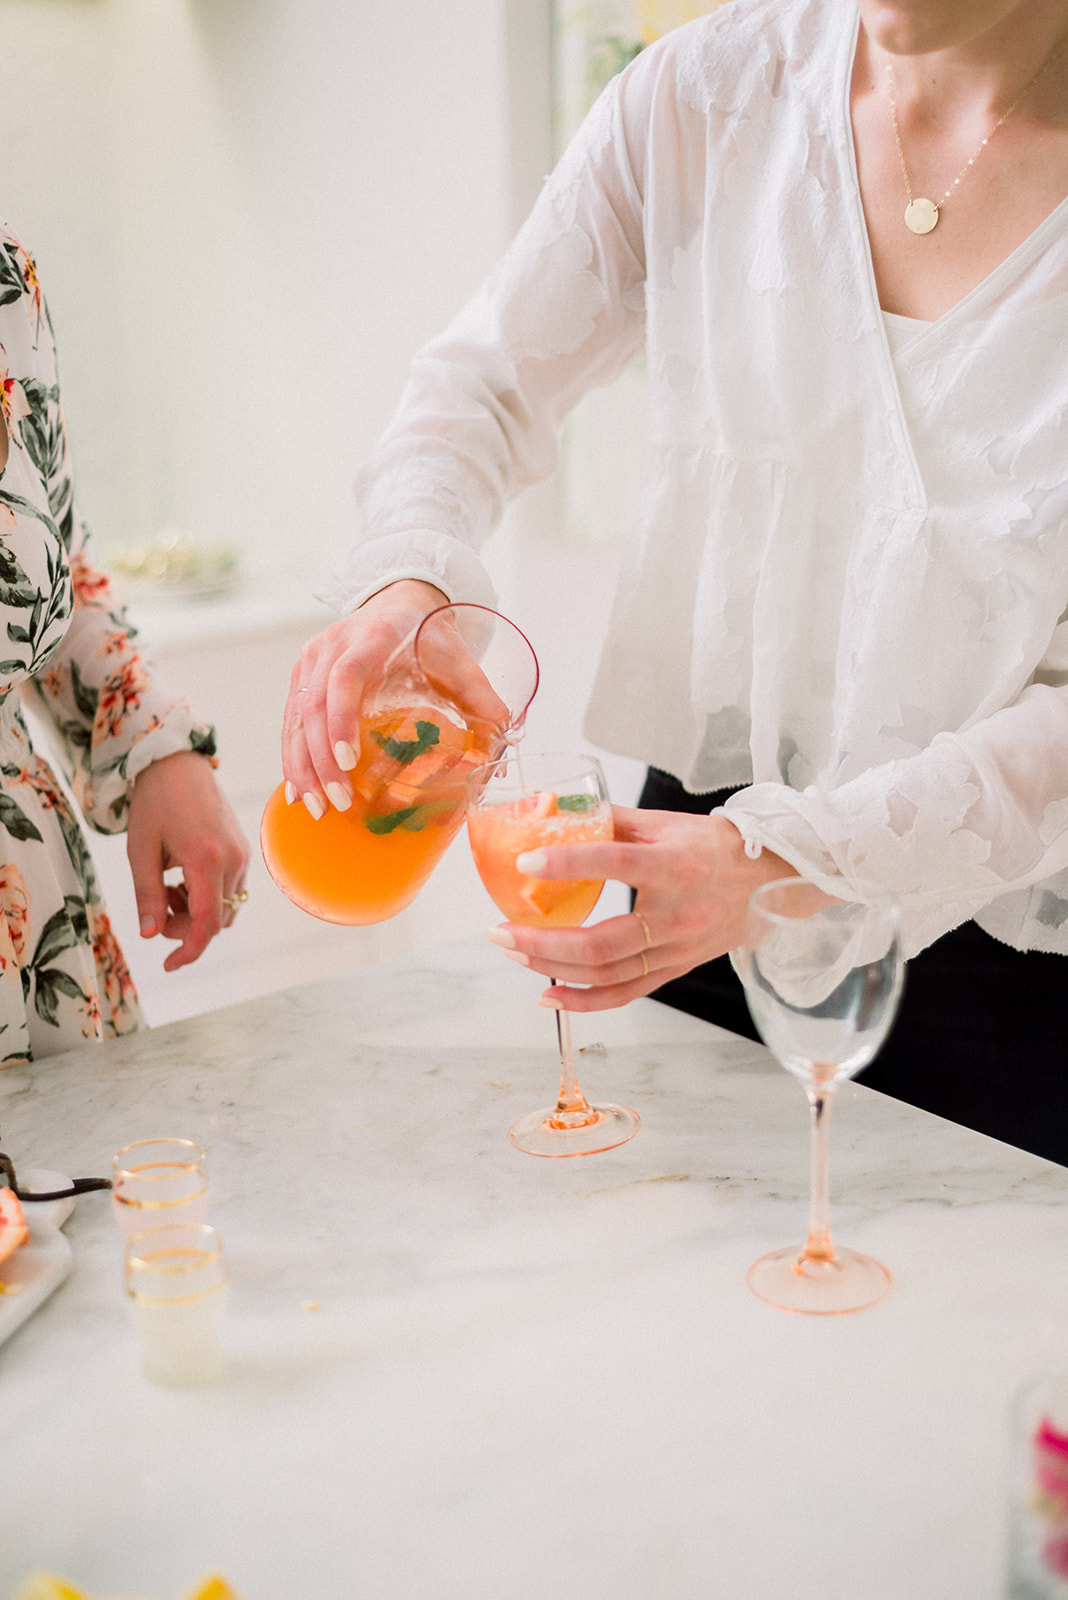 3 Easy-to-Make Citrus Cocktails to Sweeten up Your Summer - on the Bronte Bride Blog